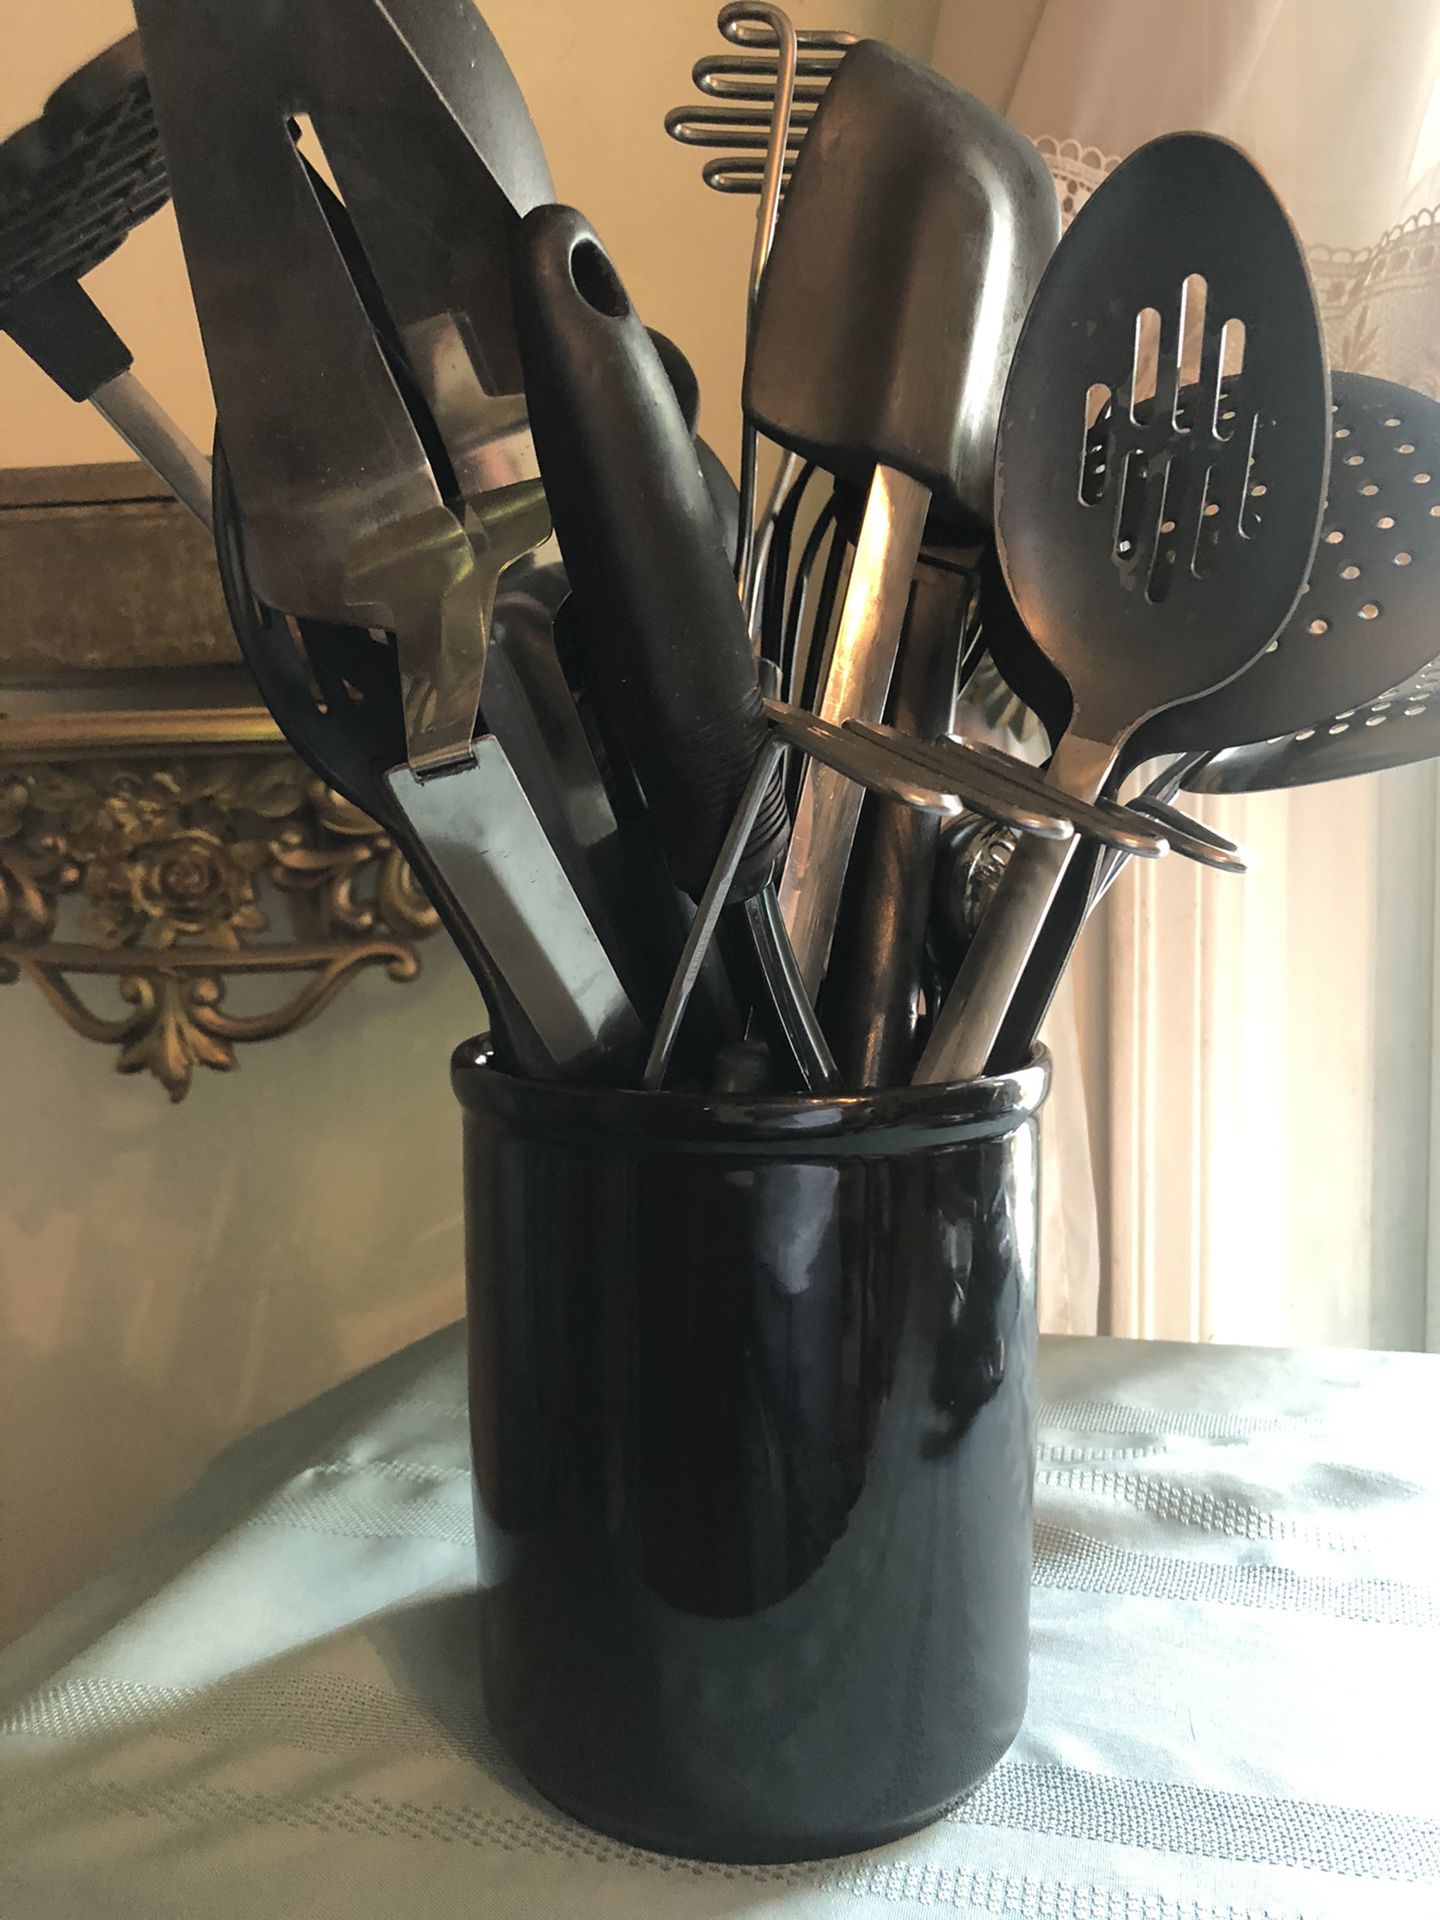 Kitchen utensils with container